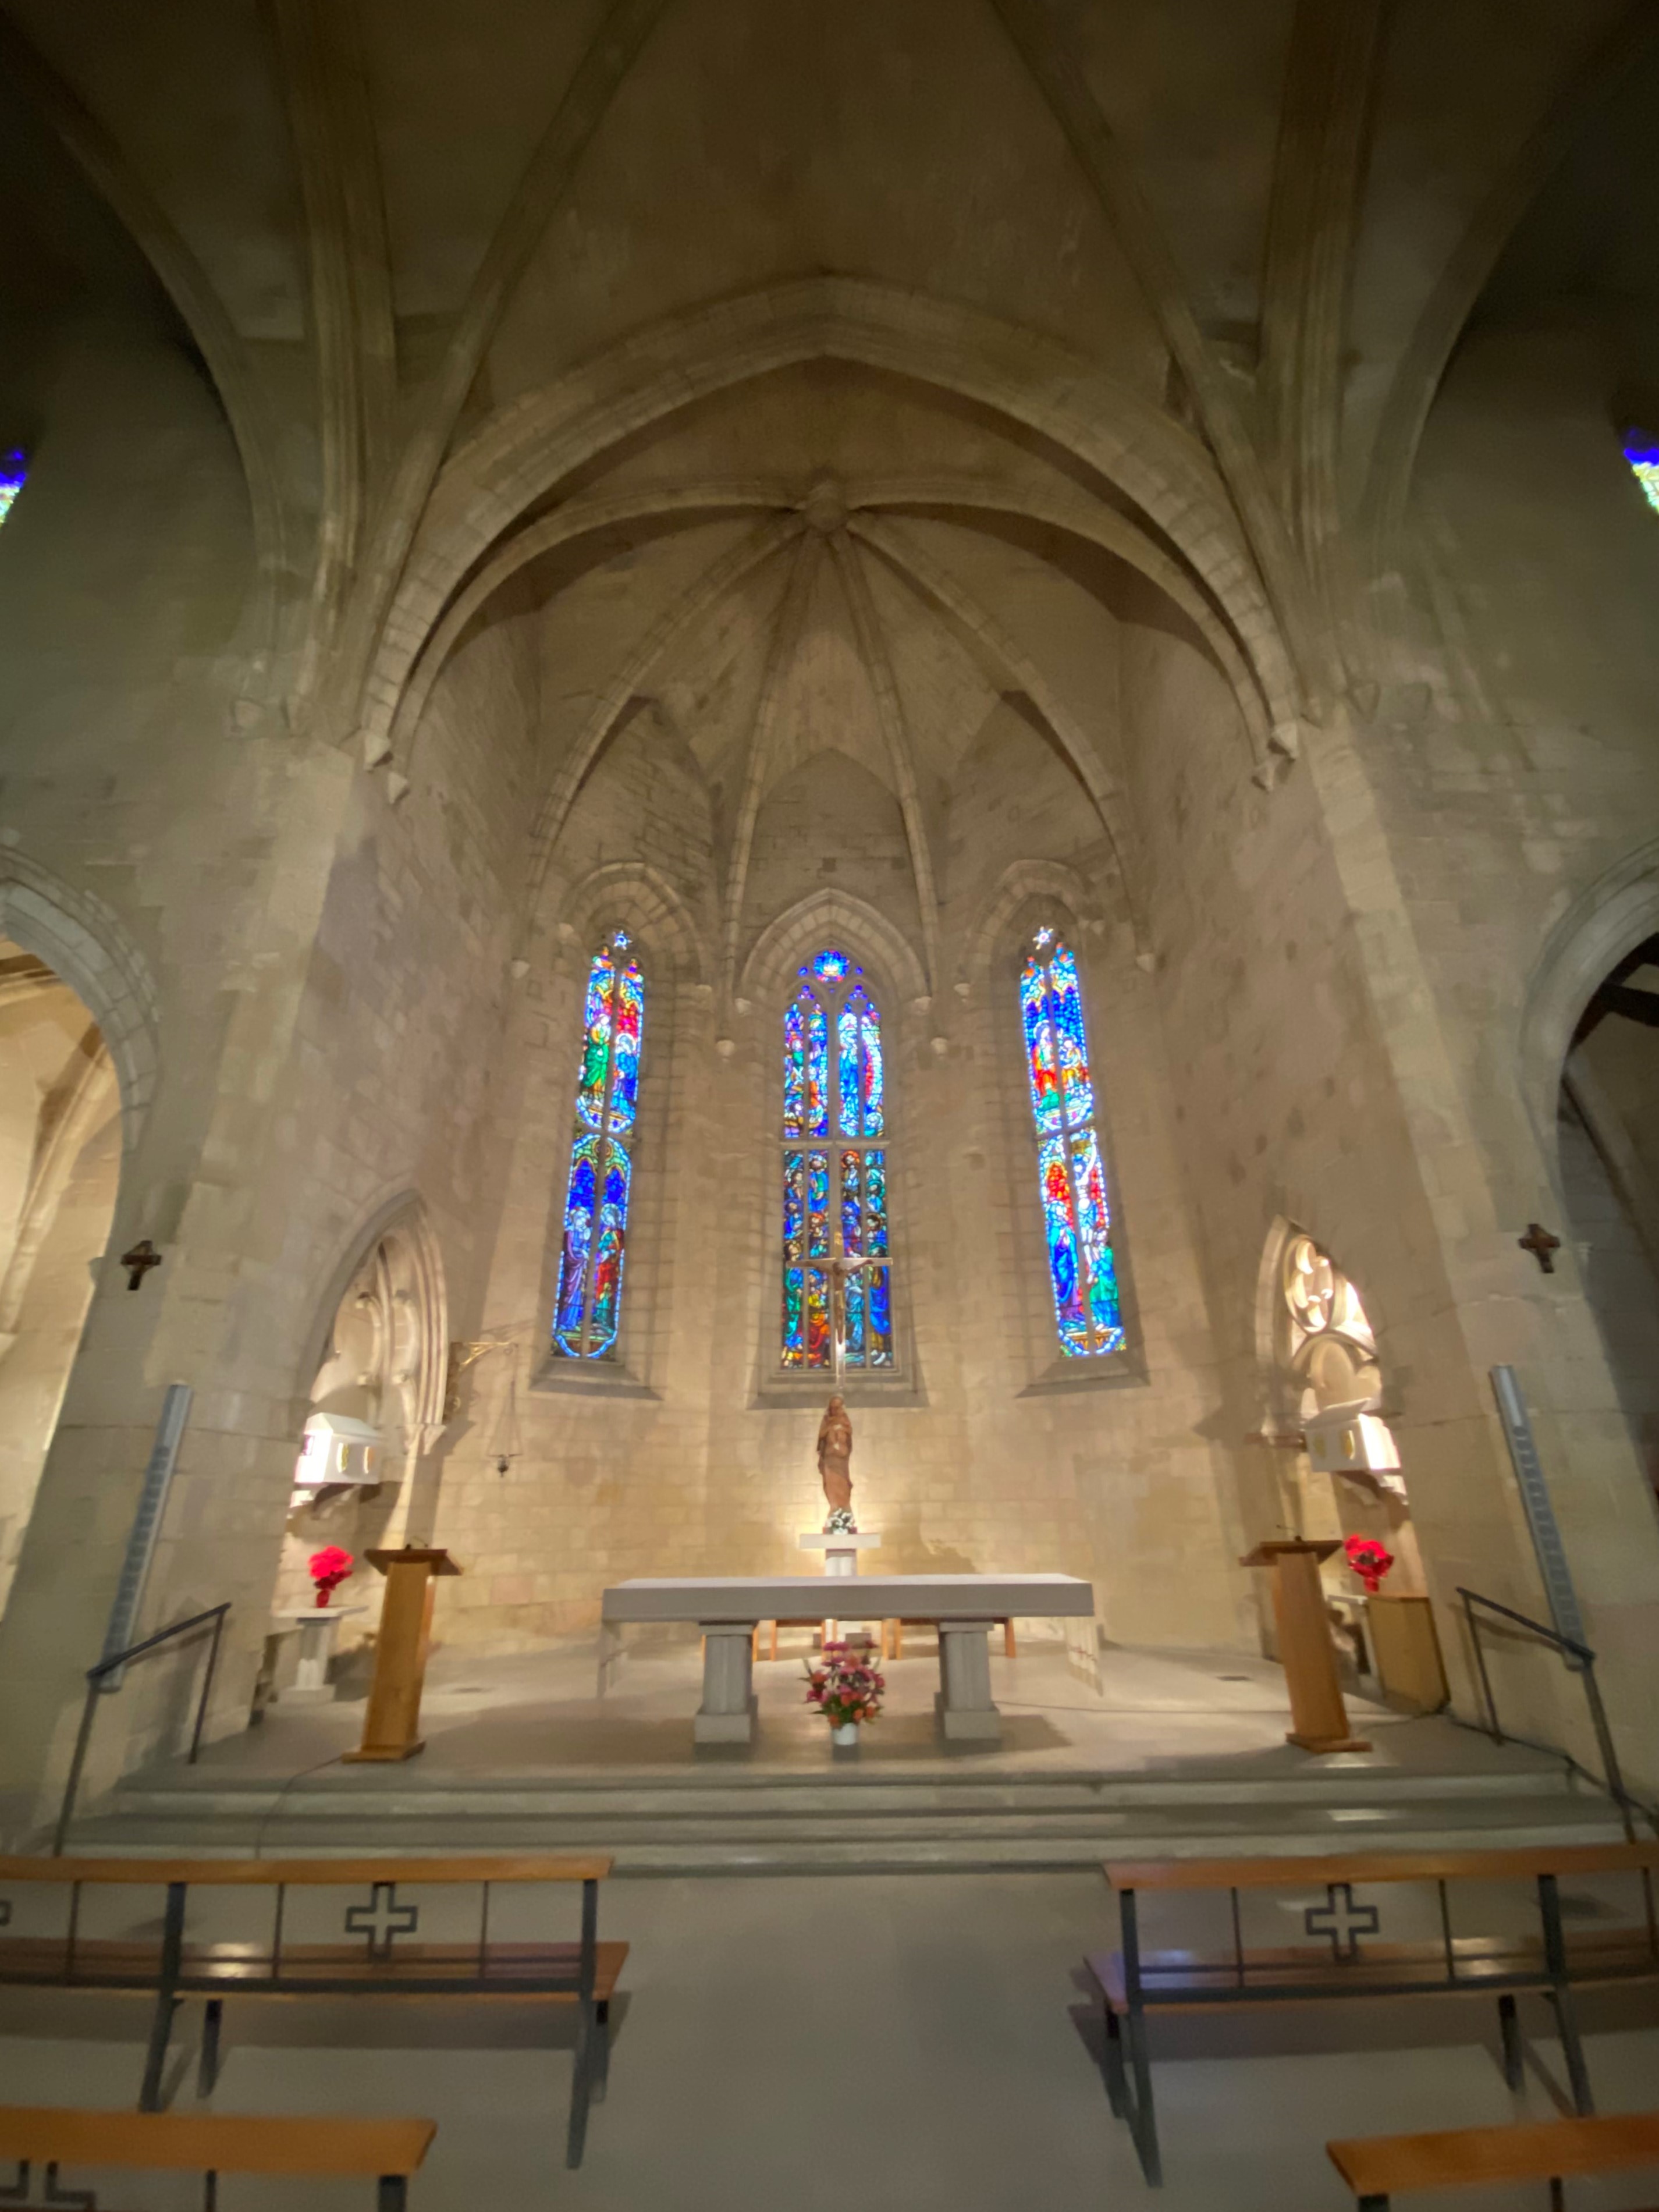 Interior of a gothic church with modern stone caskets in the niches to the left and right of the presbytery.